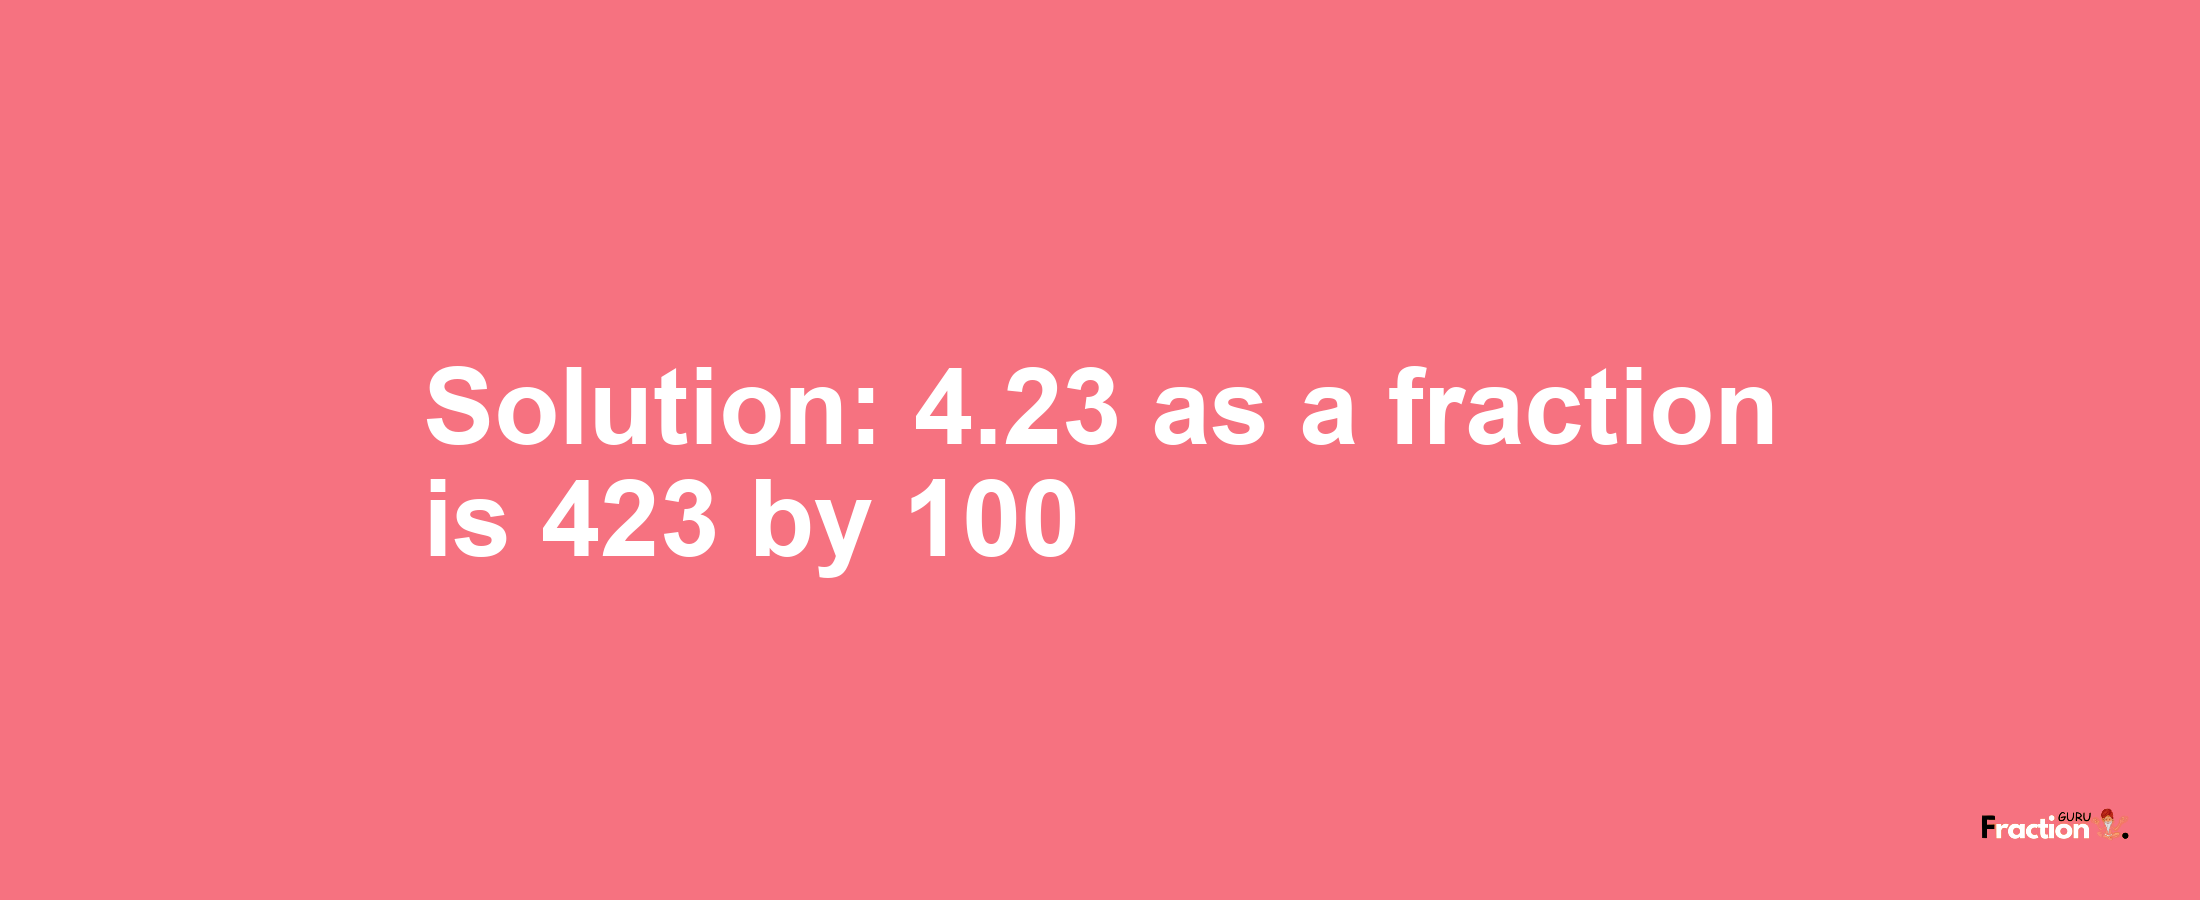 Solution:4.23 as a fraction is 423/100